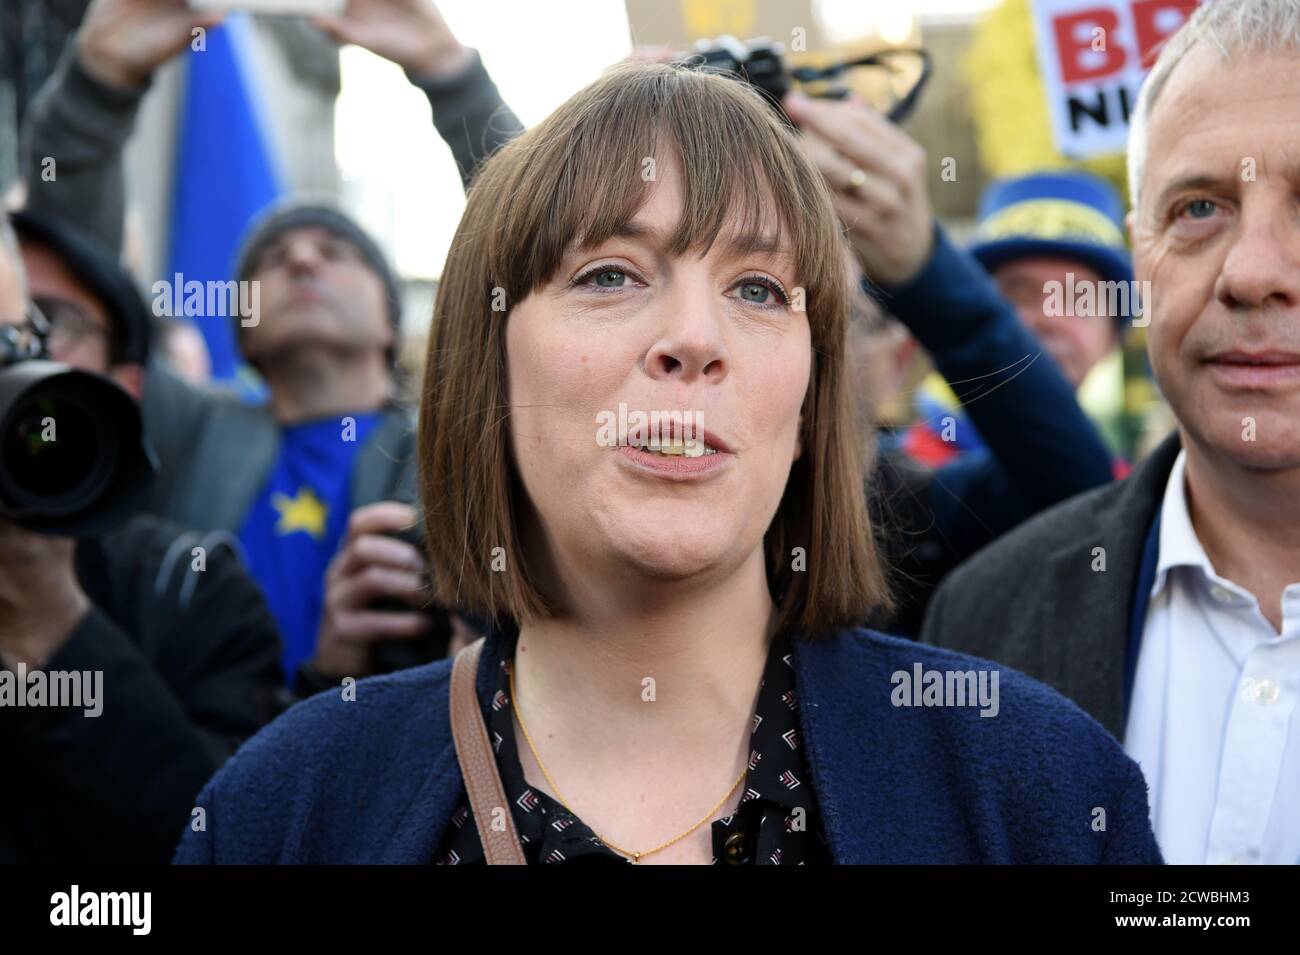 Photograph of Jess Philips speaking at a Pro-Remain march. Jessica Rose Phillips (1981-) a British Labour Party politician. She has served as the Member of Parliament for Birmingham Yardley since the 2015 general election. Stock Photo